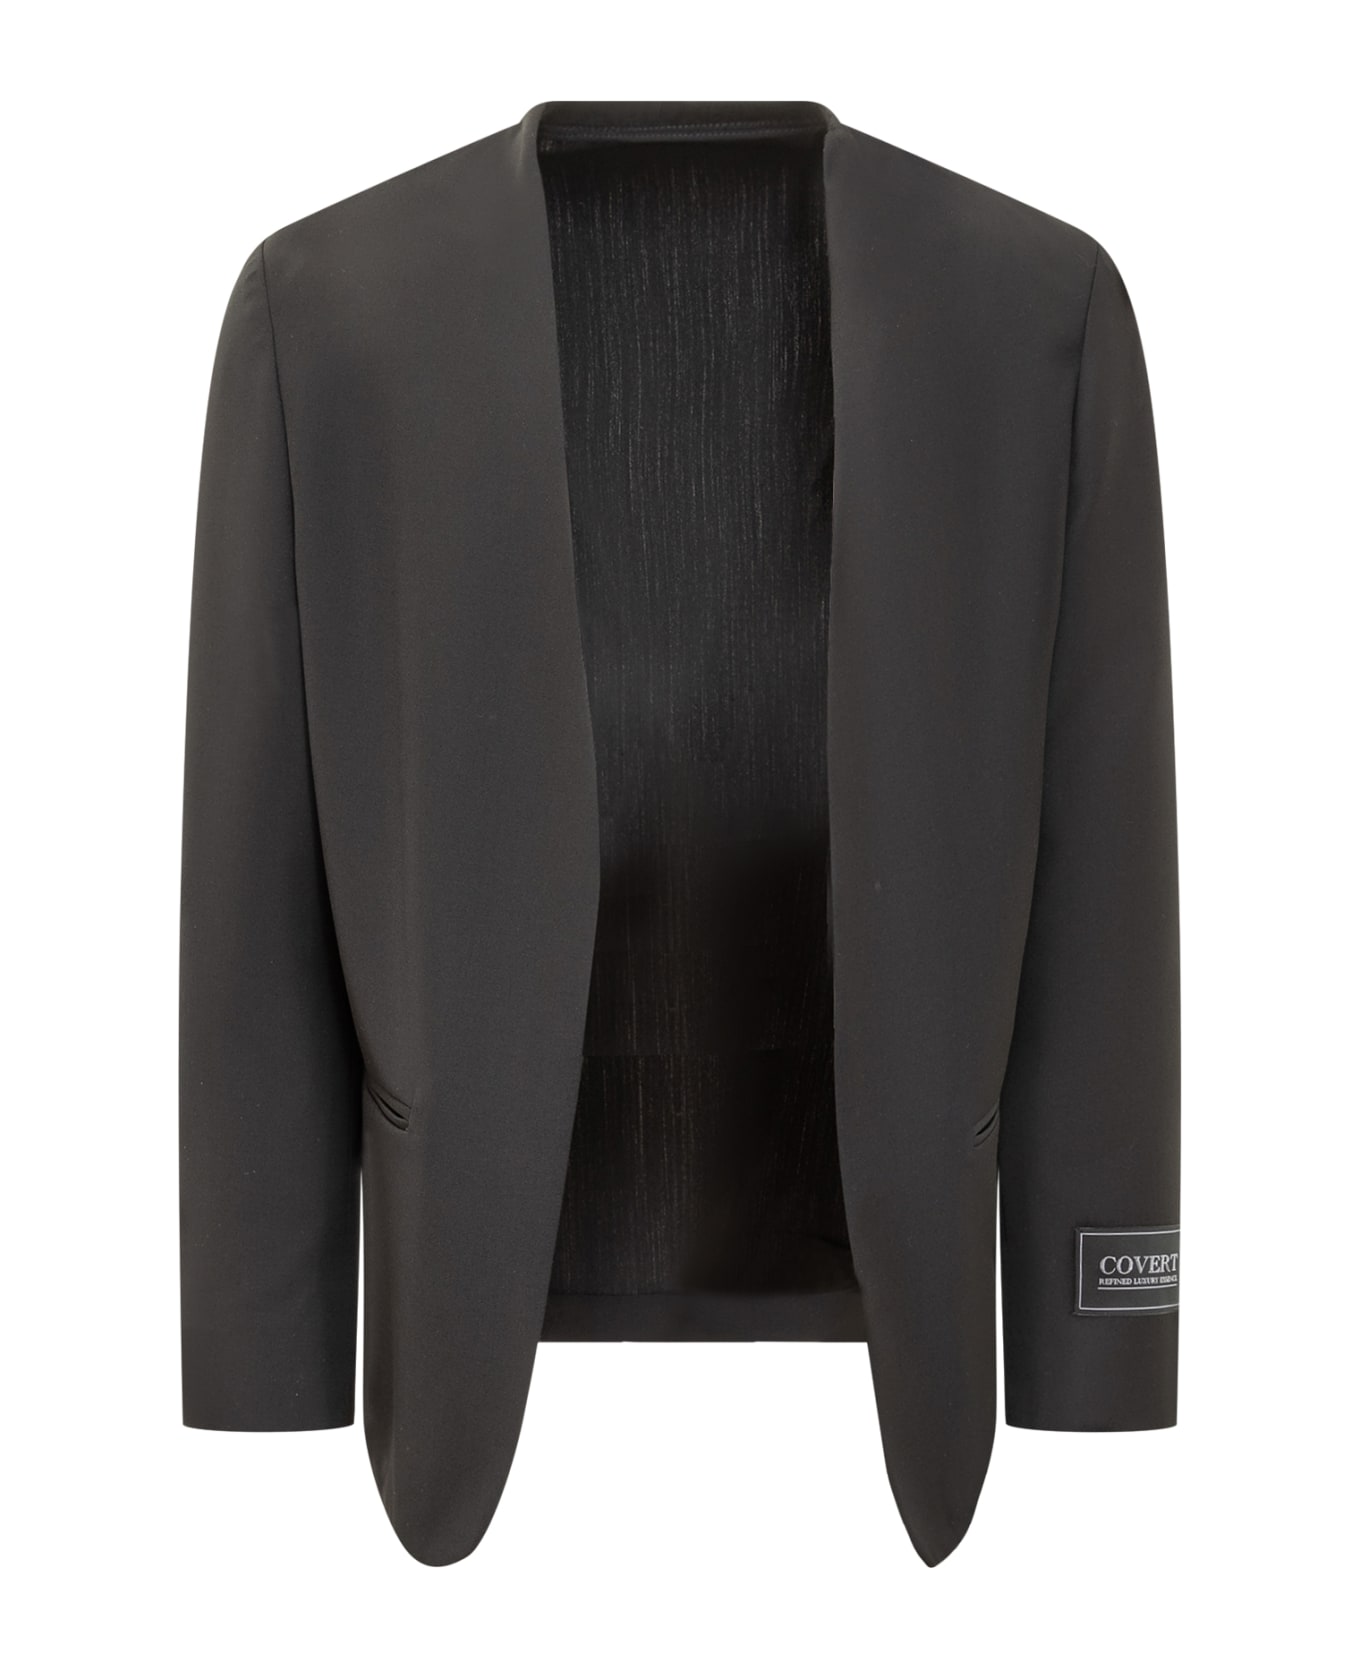 Covert Blazer Open At The Front - NERO